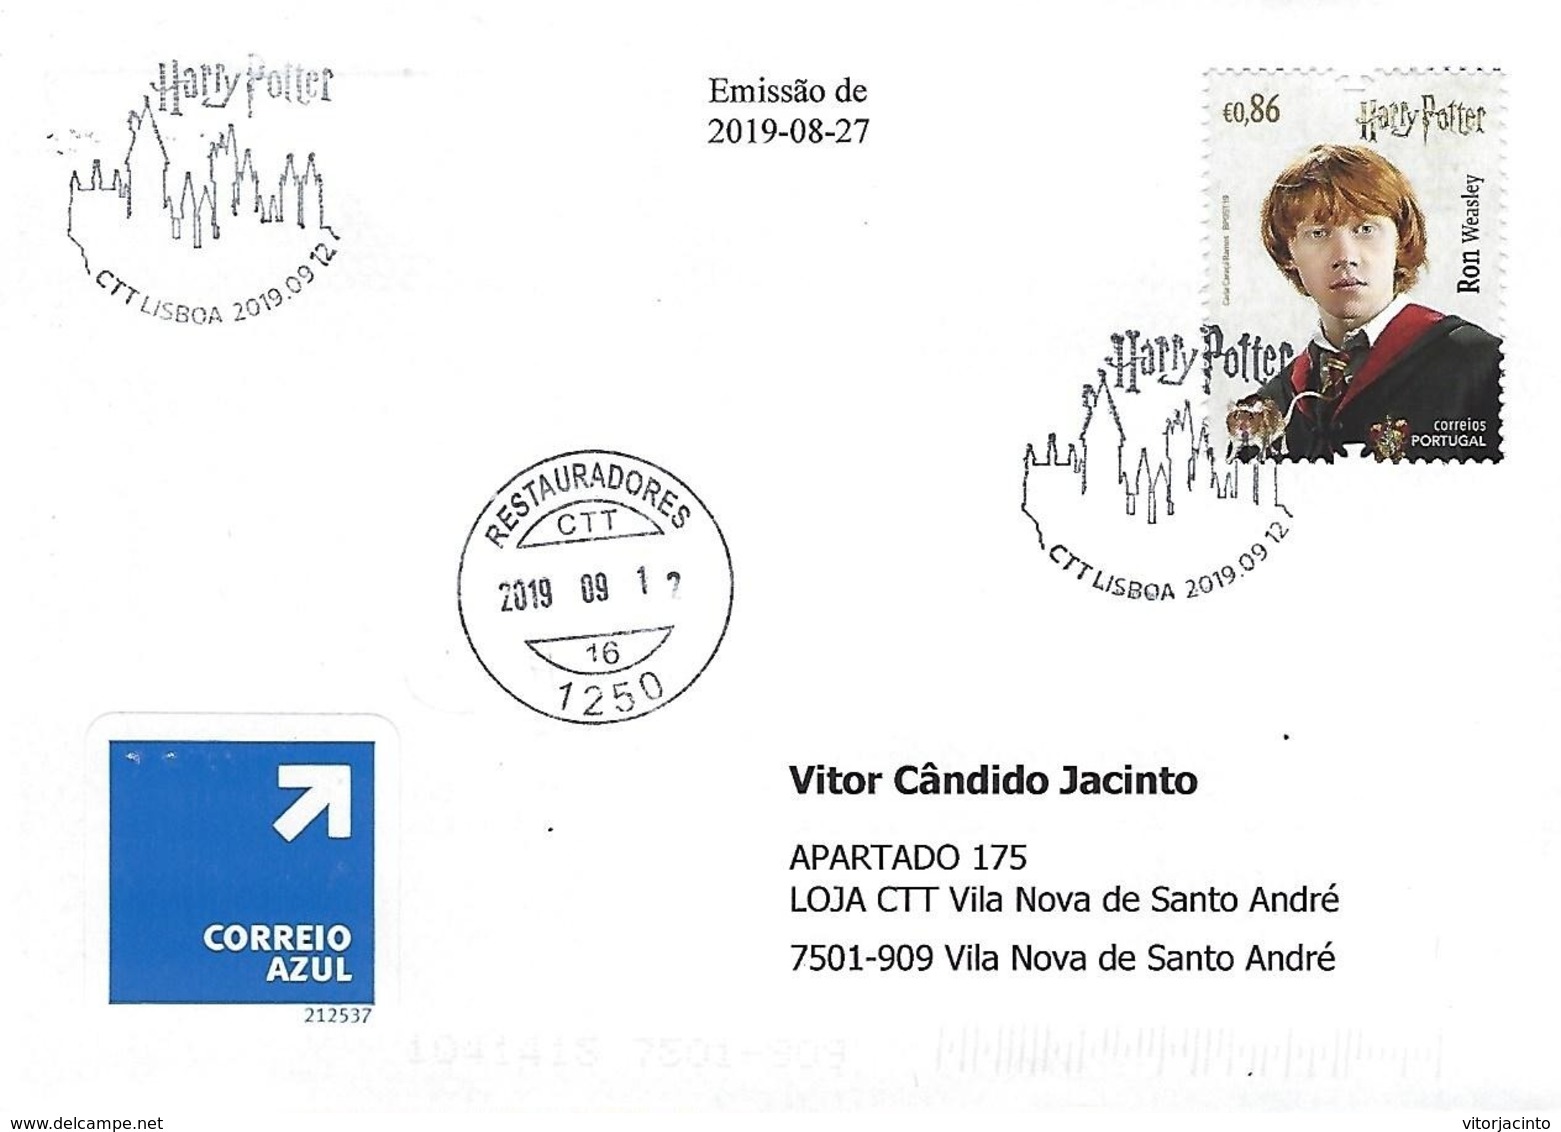 PORTUGAL - Harry Potter 2019 - Commemorative Postmark Above HPotter Stamps ~ Cover Real Circulated ~ - Poststempel (Marcophilie)